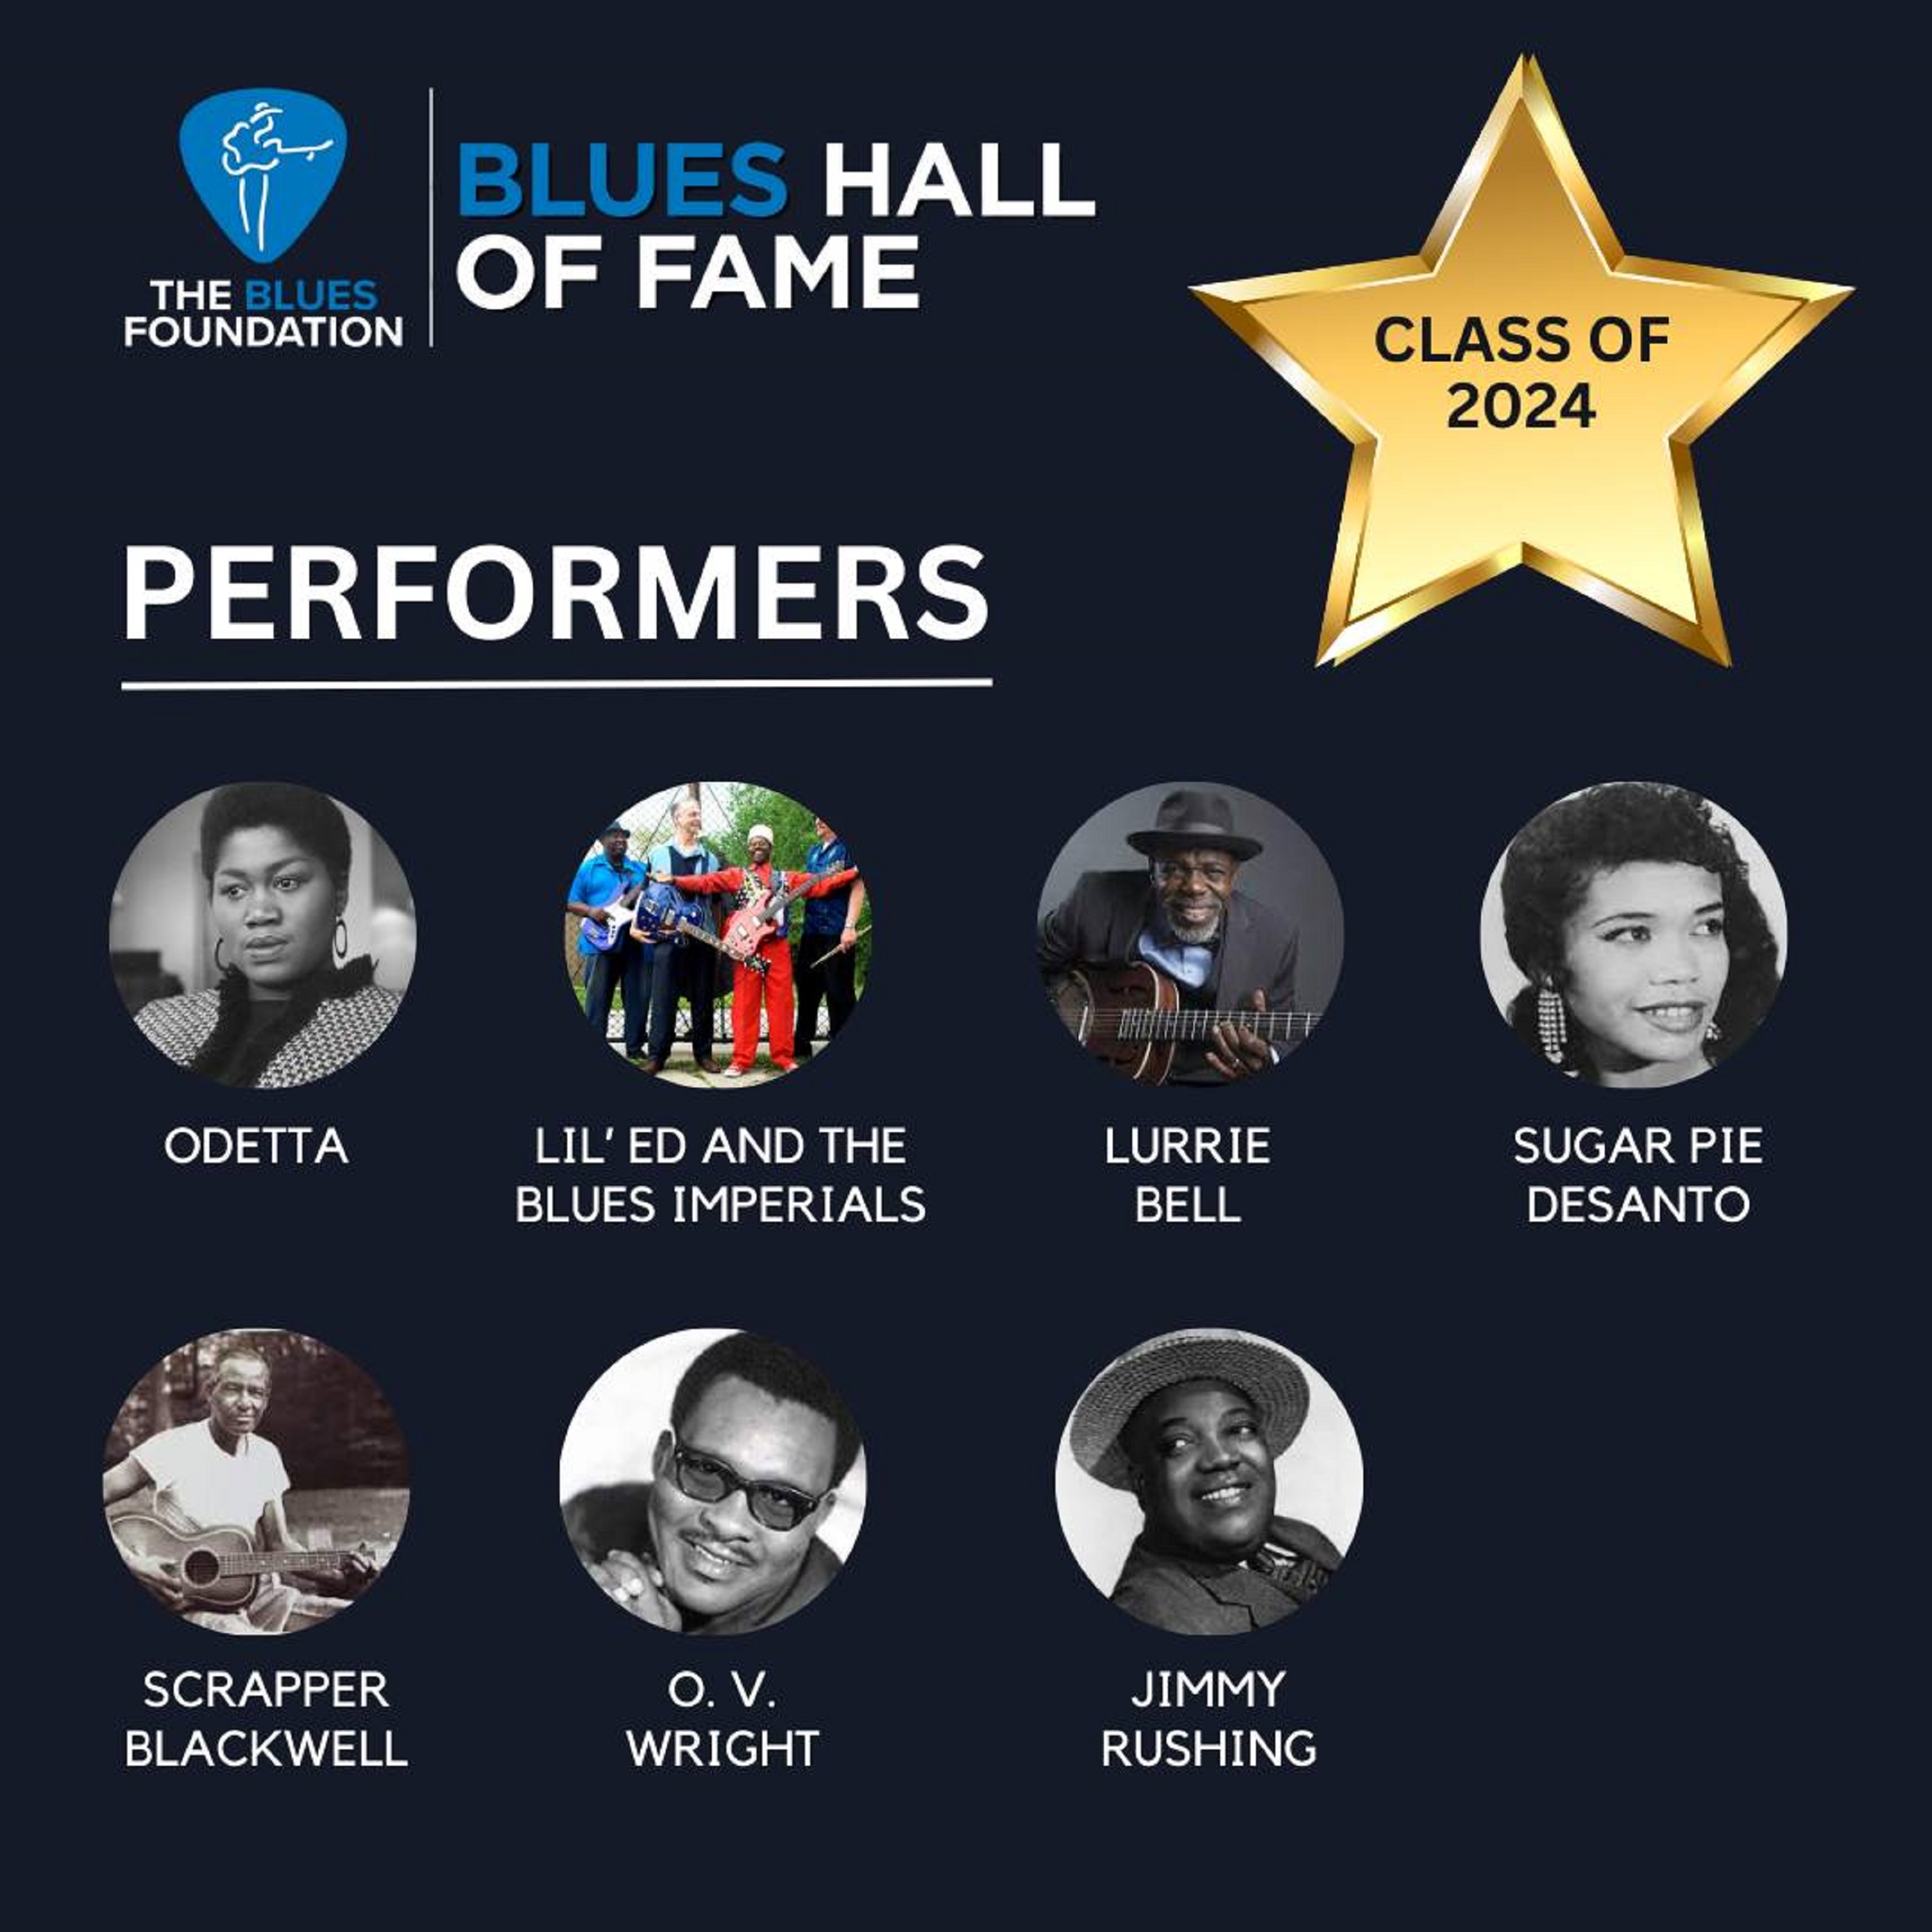 The Blues Foundation Honors The Blues Hall of Fame Class of 2024